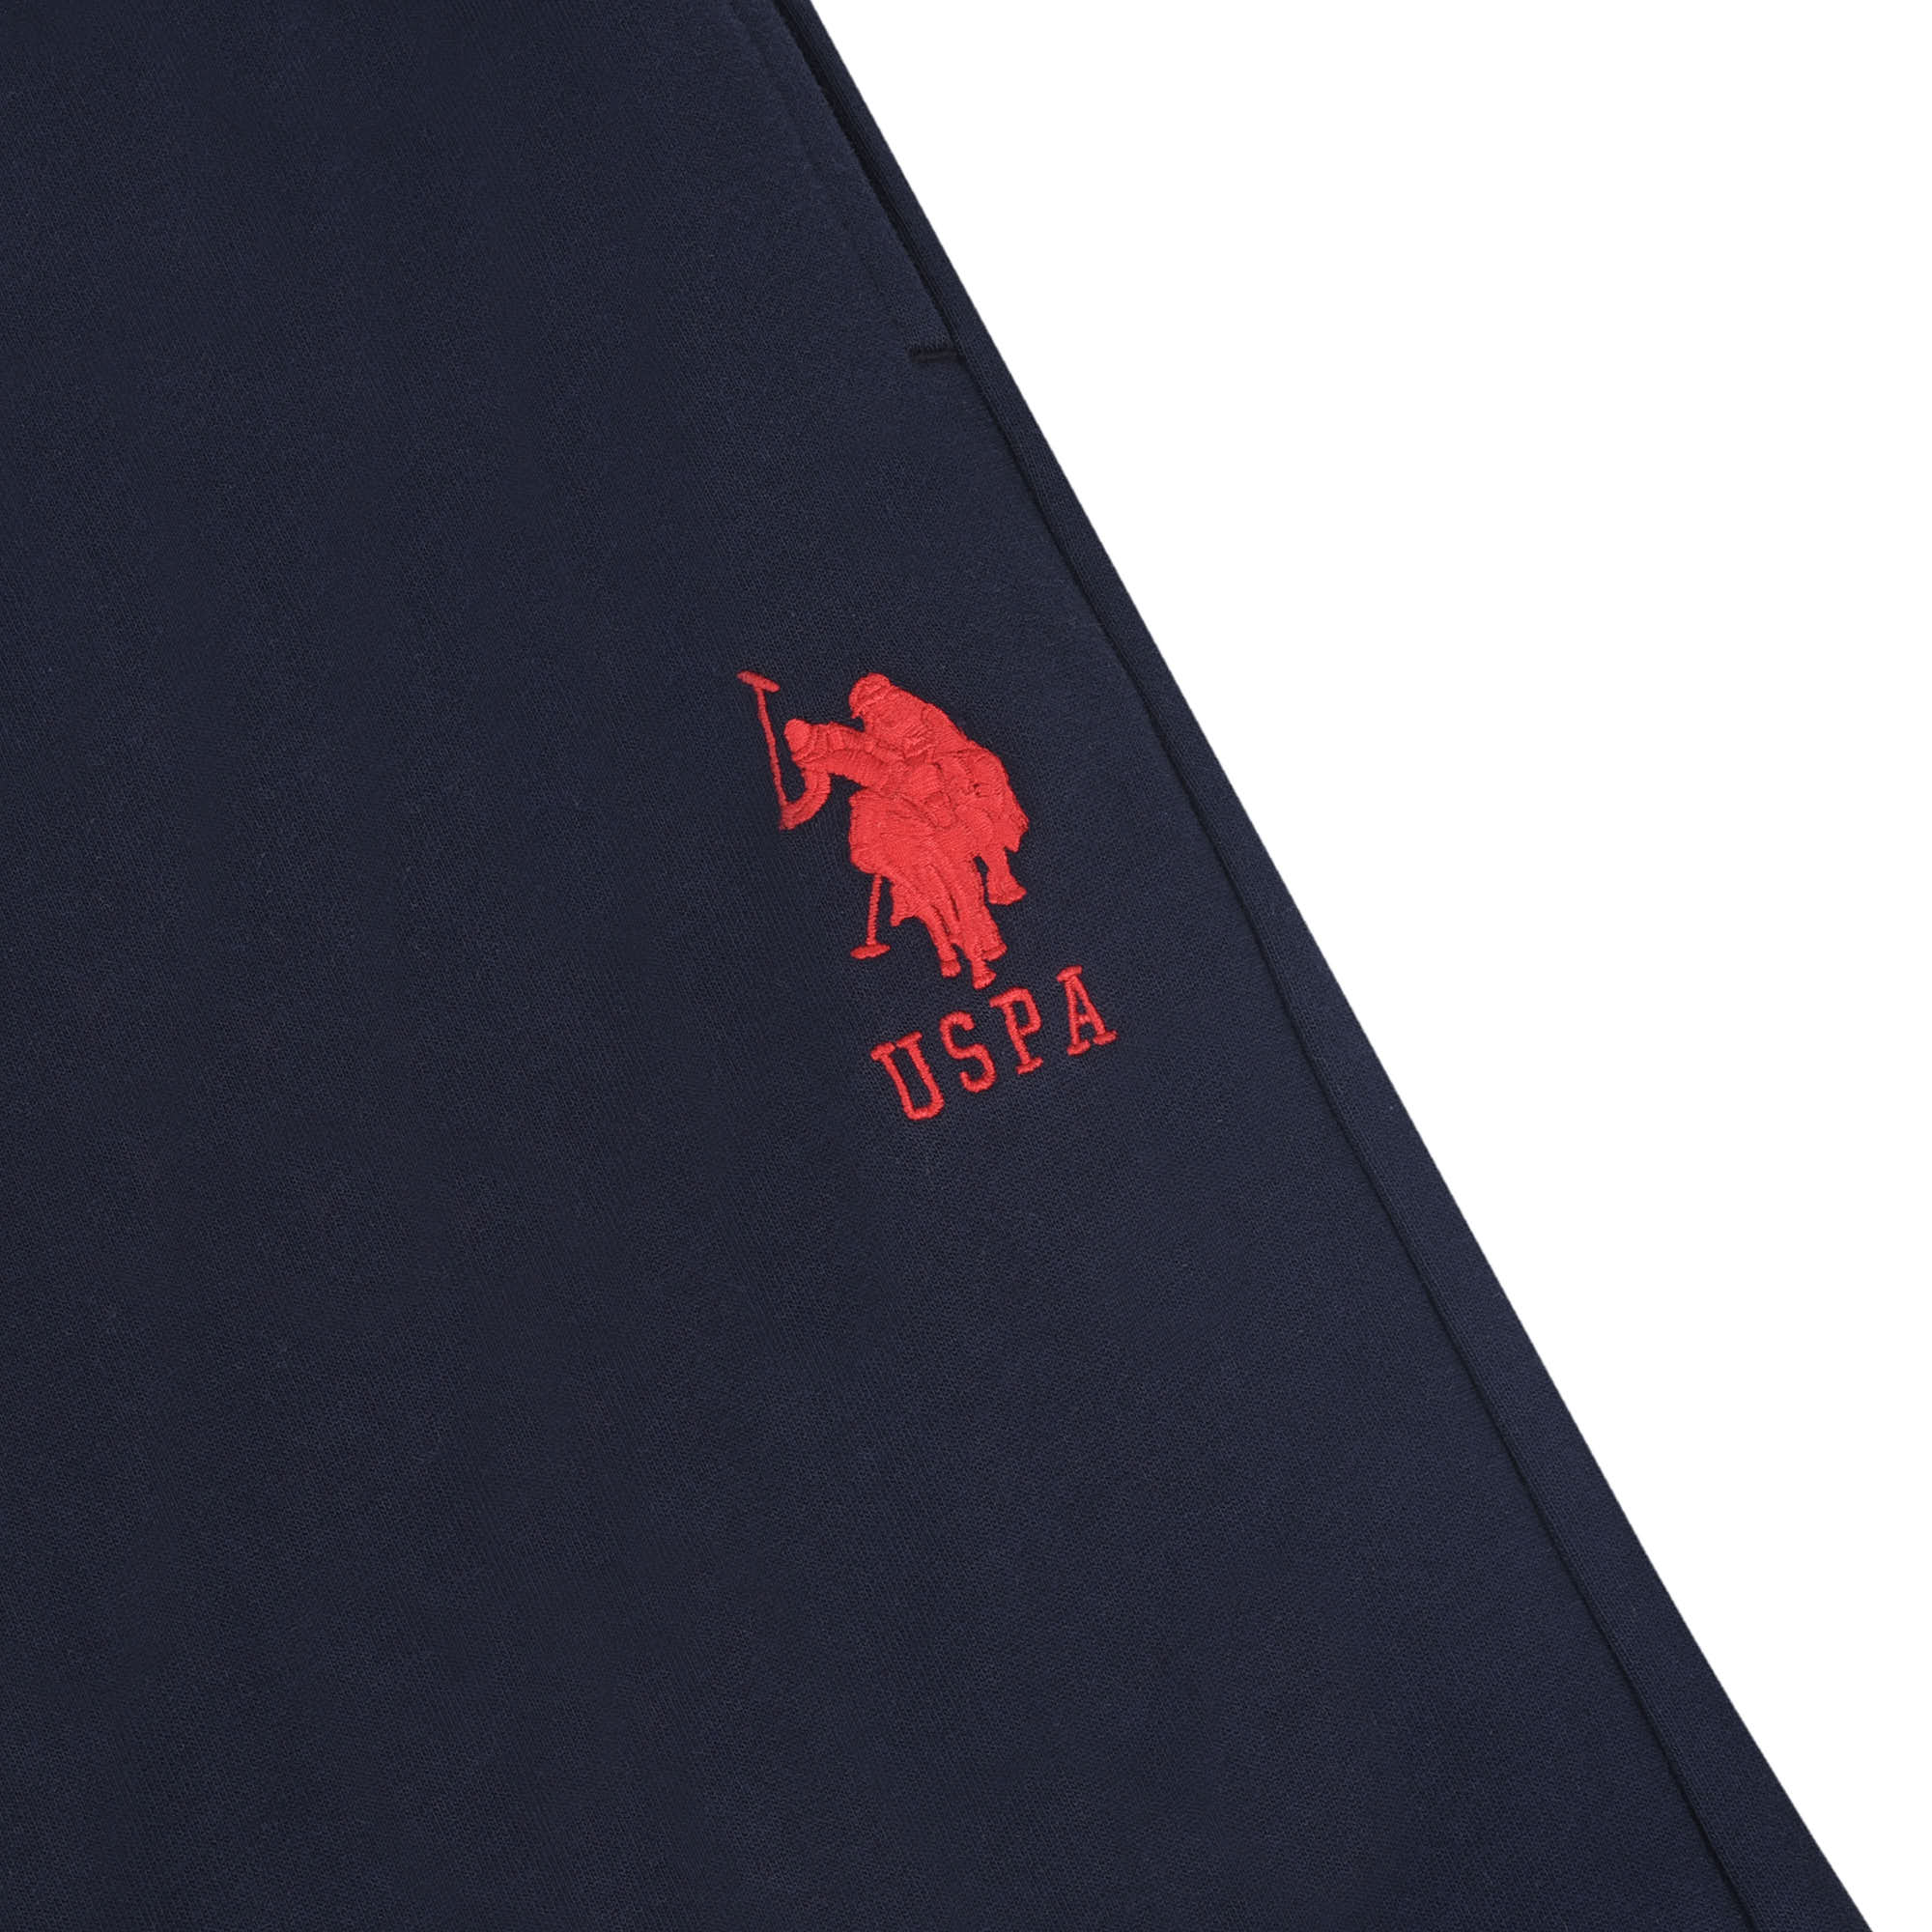 Mens Player 3 Joggers in Navy Blazer Red DHM